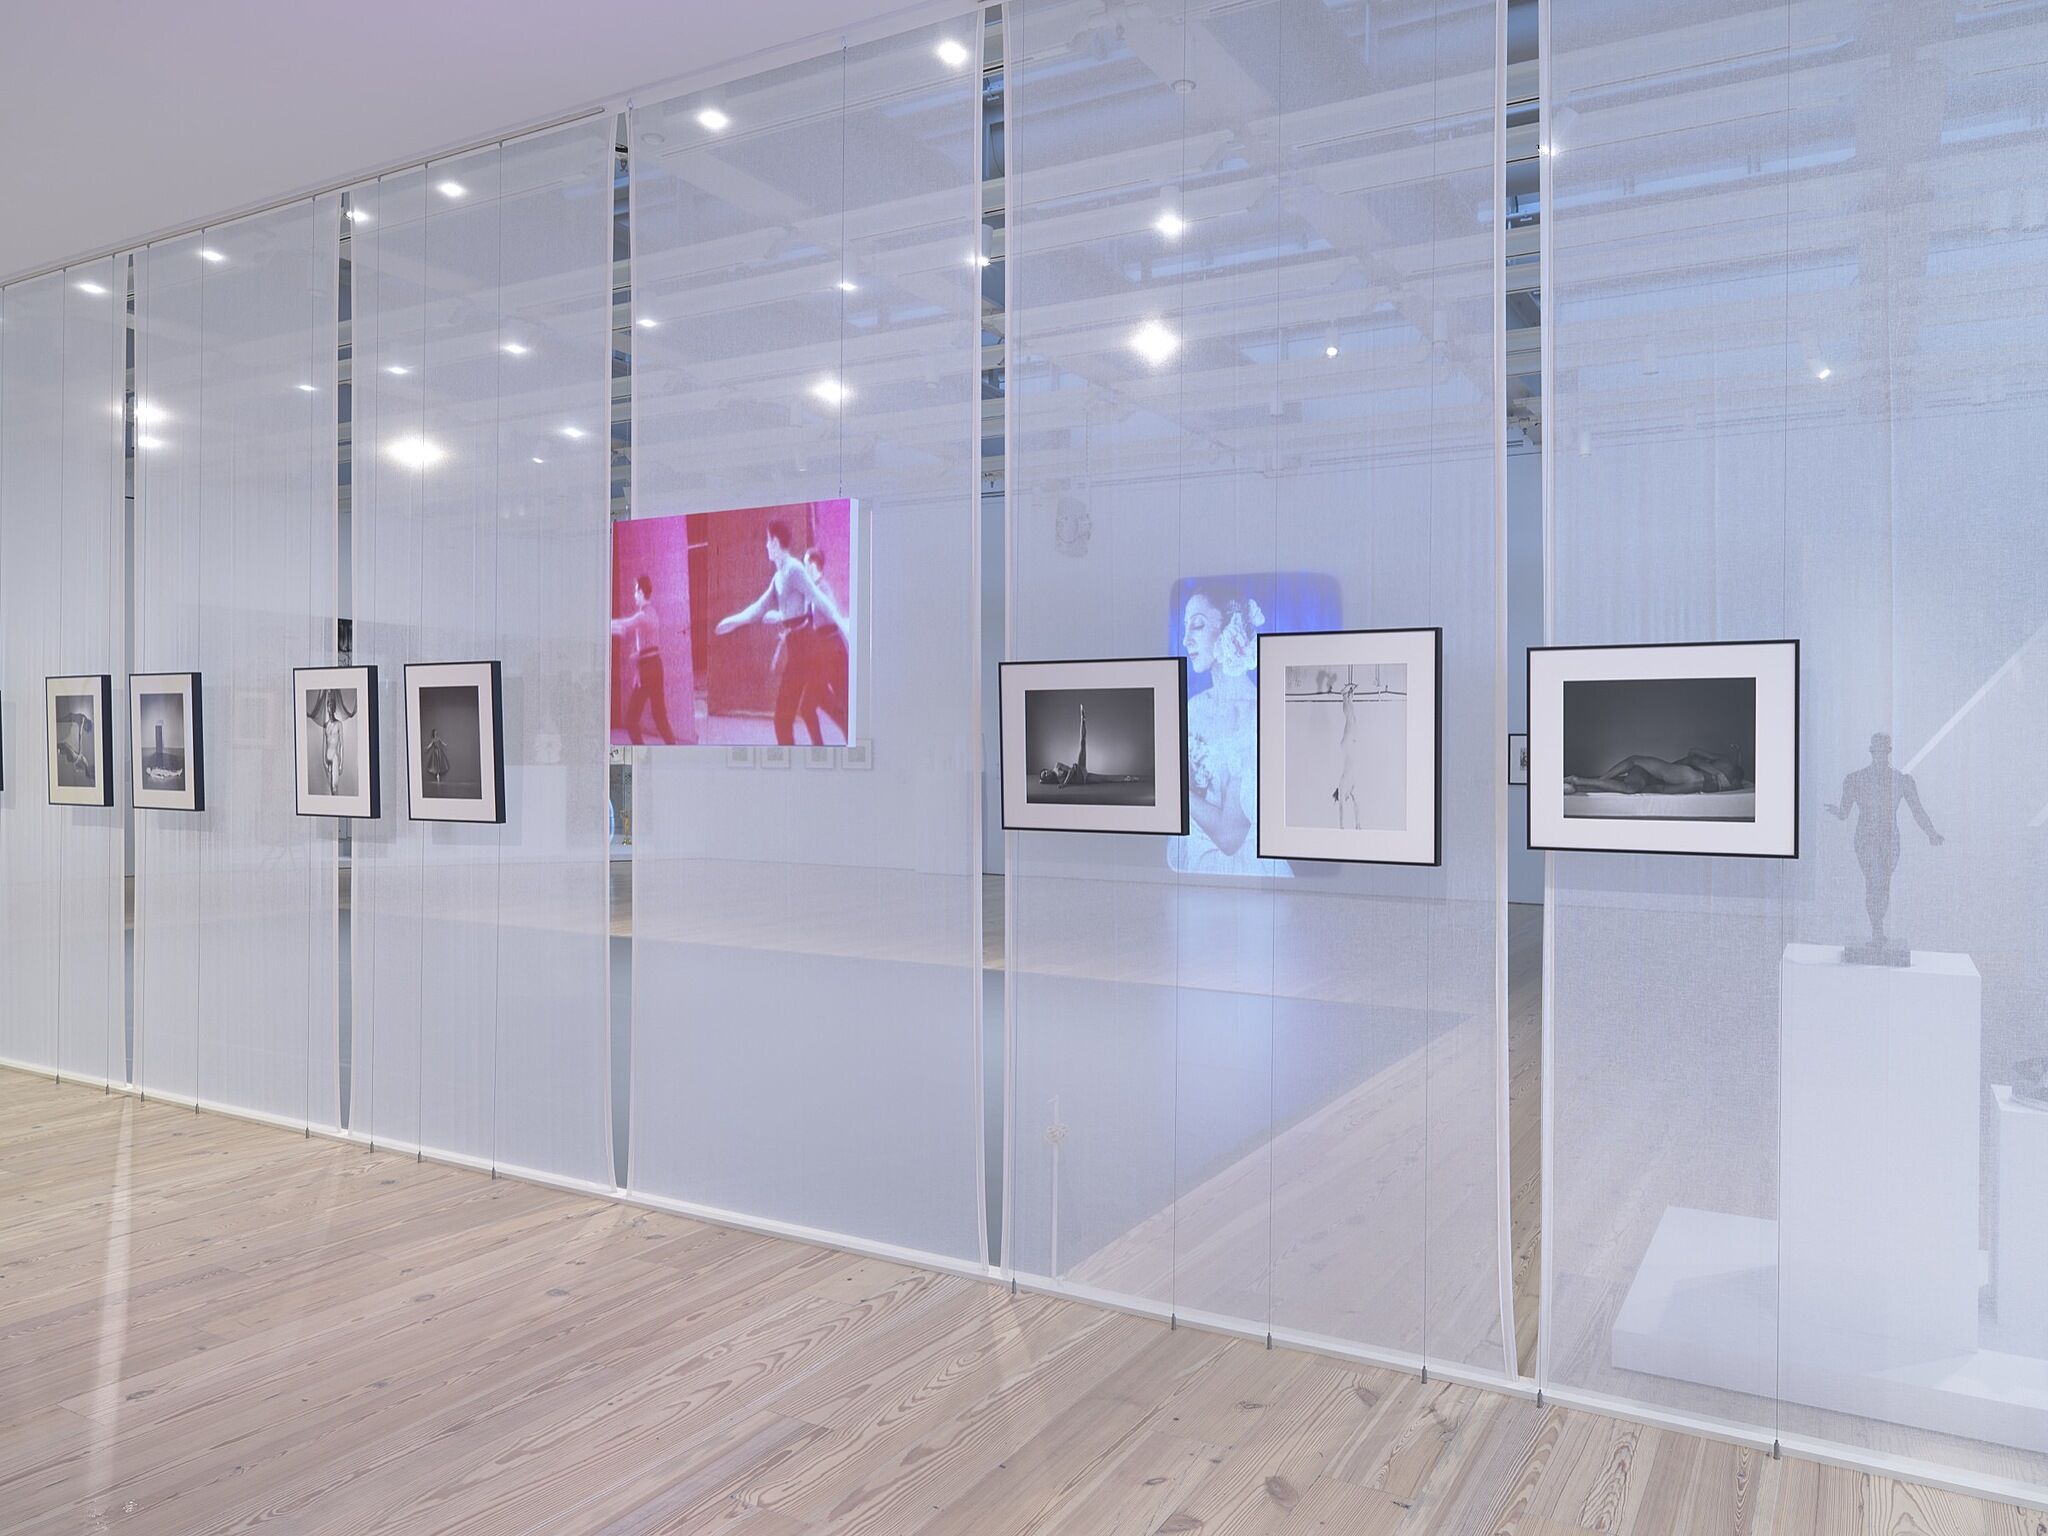 A photo of the Whitney galleries with various photos and videos on the wall.